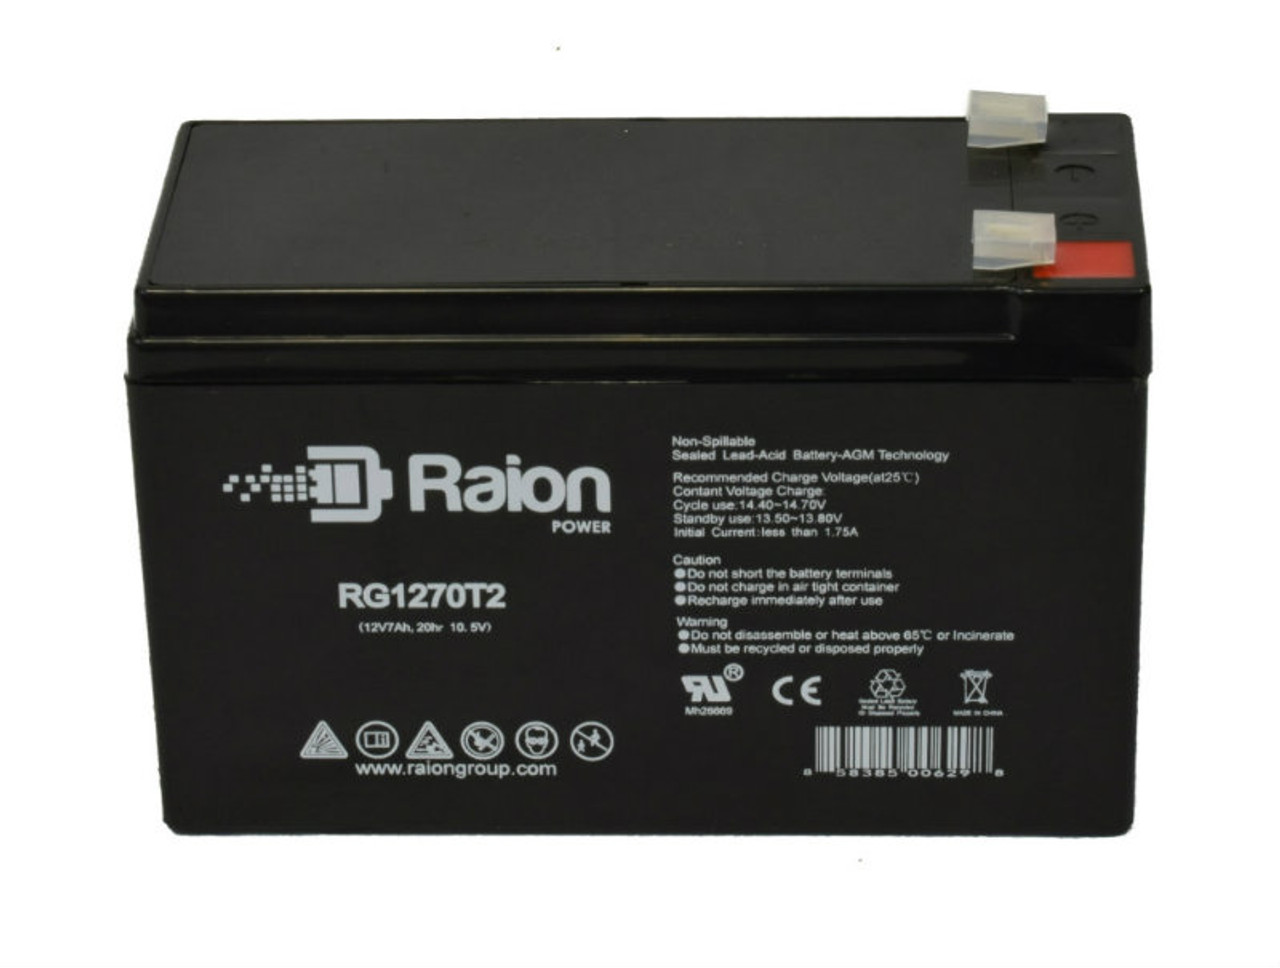 Raion Power RG1270T2 12V 7Ah Lead Acid Battery for Aosom 370-137WT 12V Ride On Truck with Wide Seat